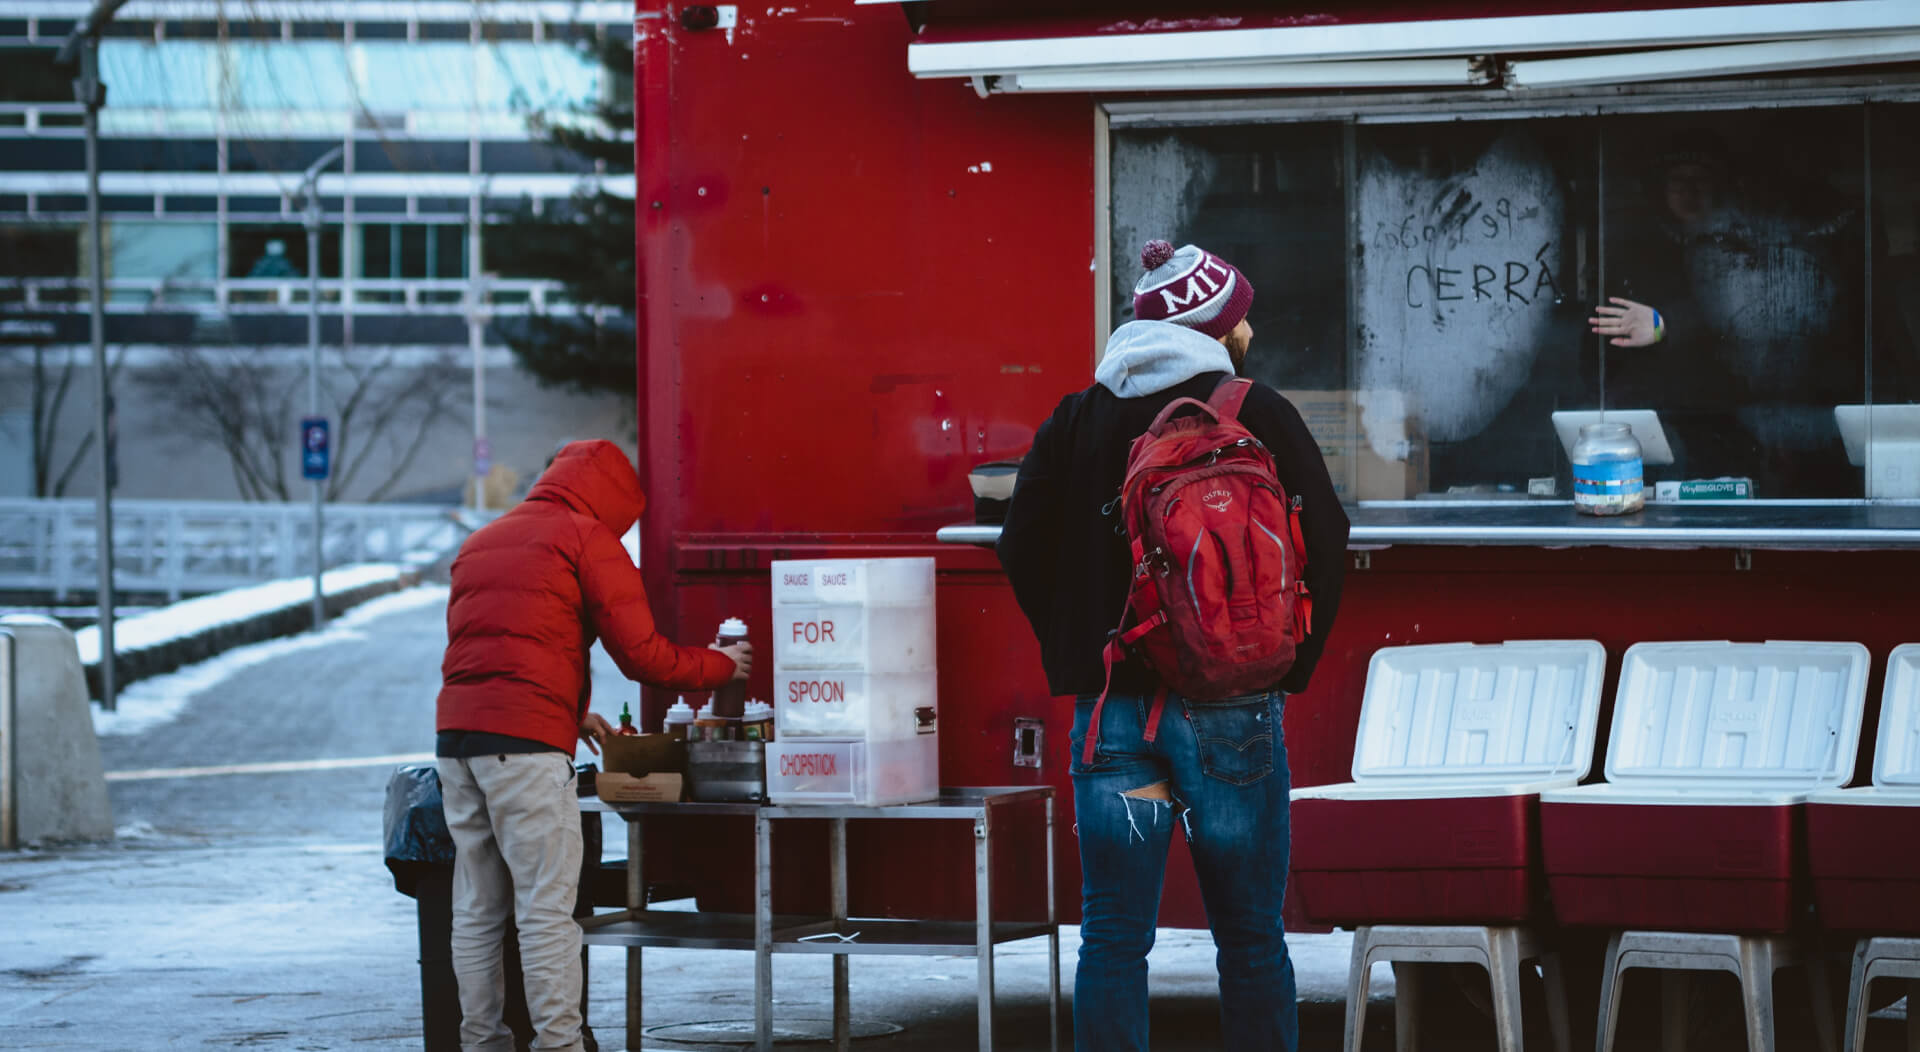 two persons at a food truck during winter